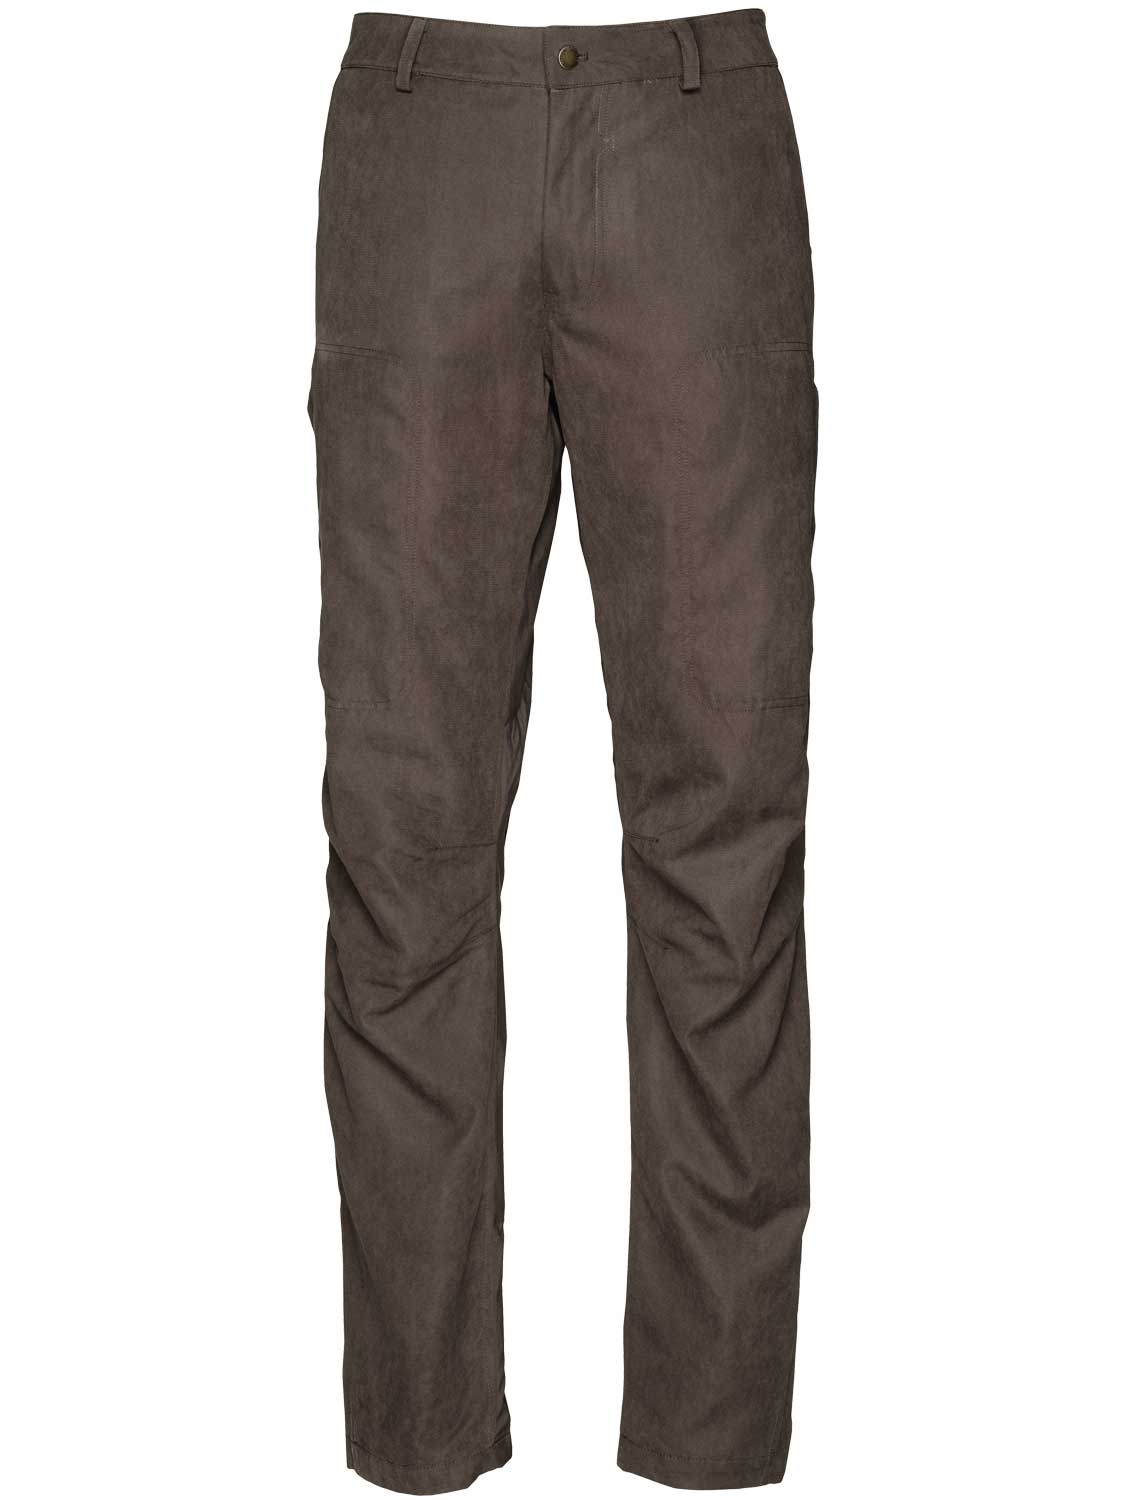 SEELAND Trousers - Mens Tyst - Moose Brown